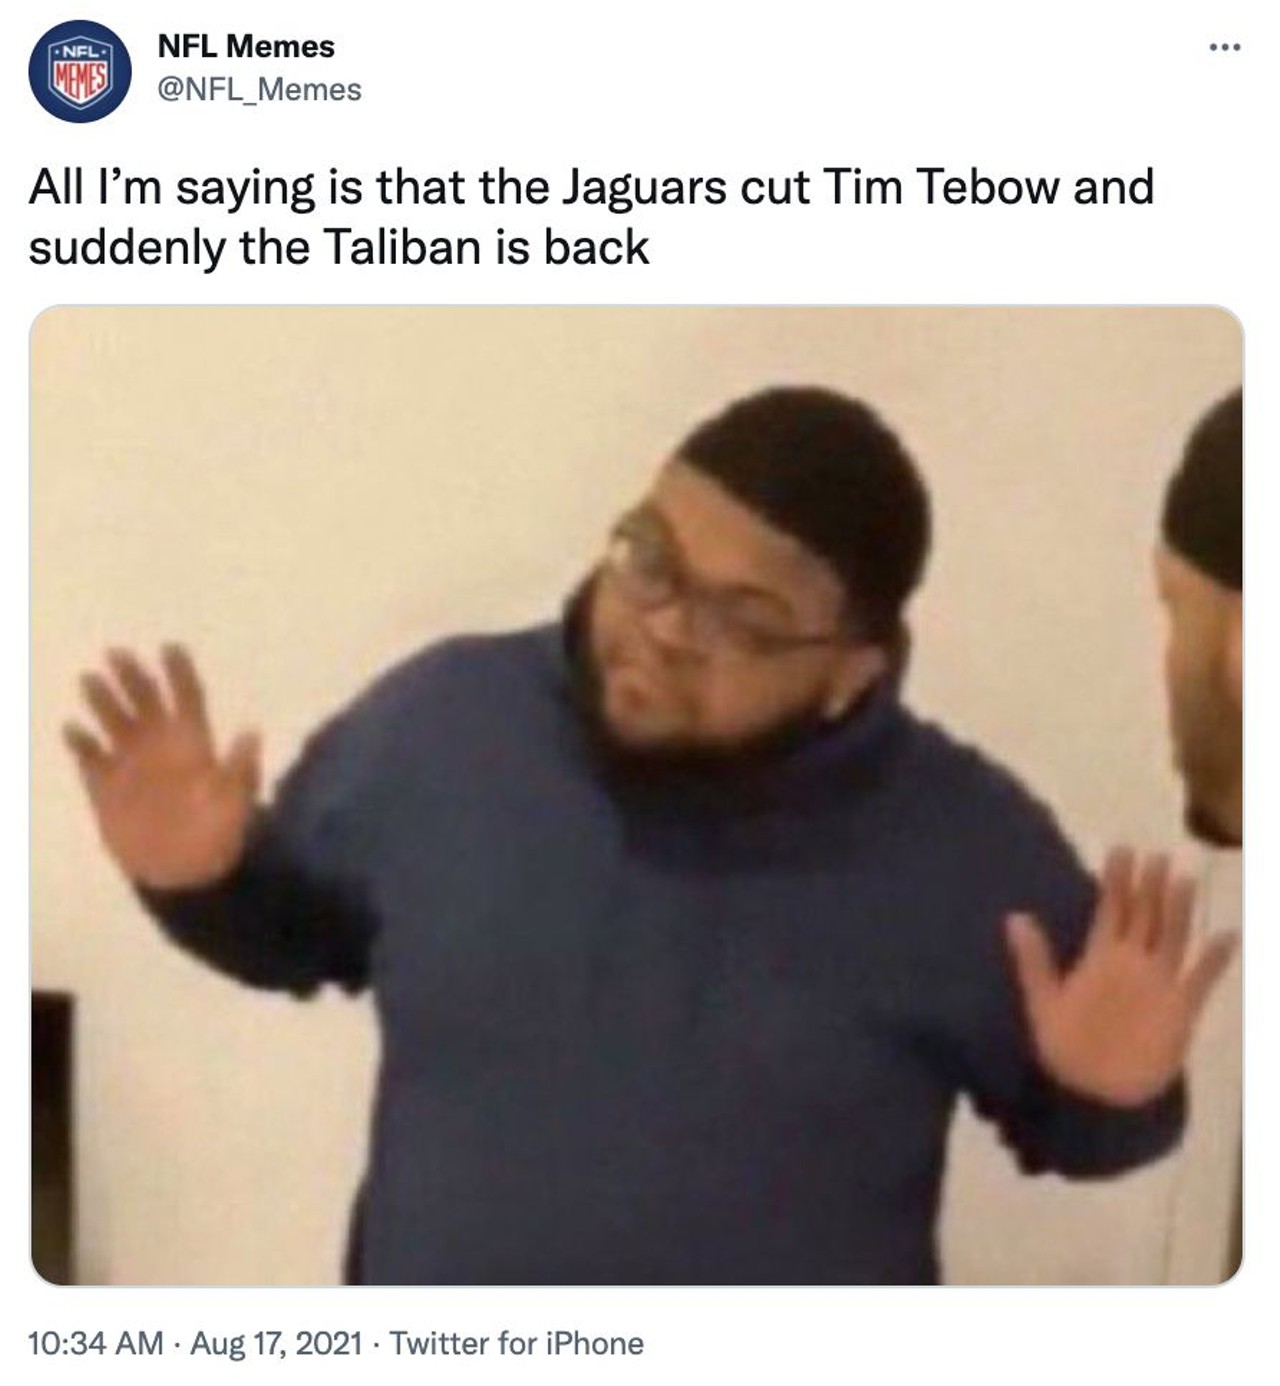 21 painfully accurate tweets about Tim Tebow getting cut from the Jags